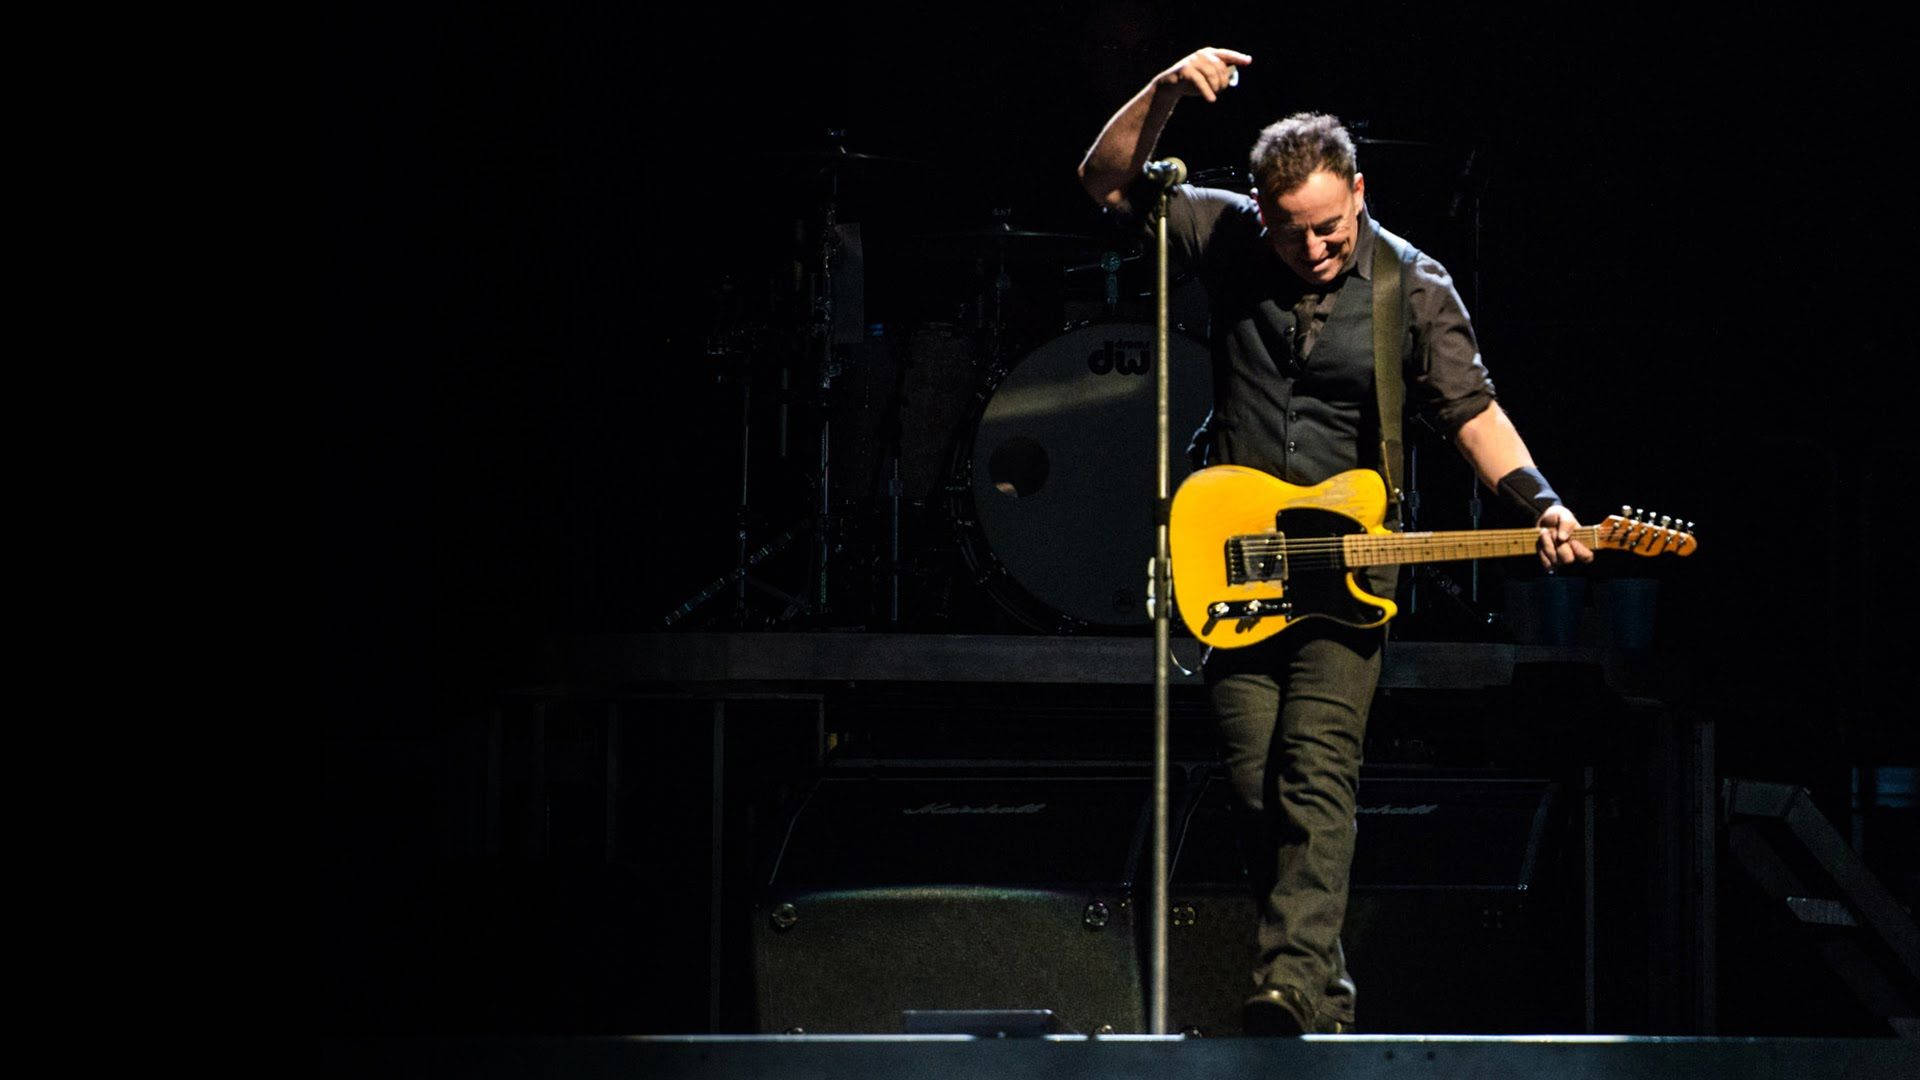 Caption: Rock icon Bruce Springsteen performing at the Light of Day 2015 concert. Wallpaper